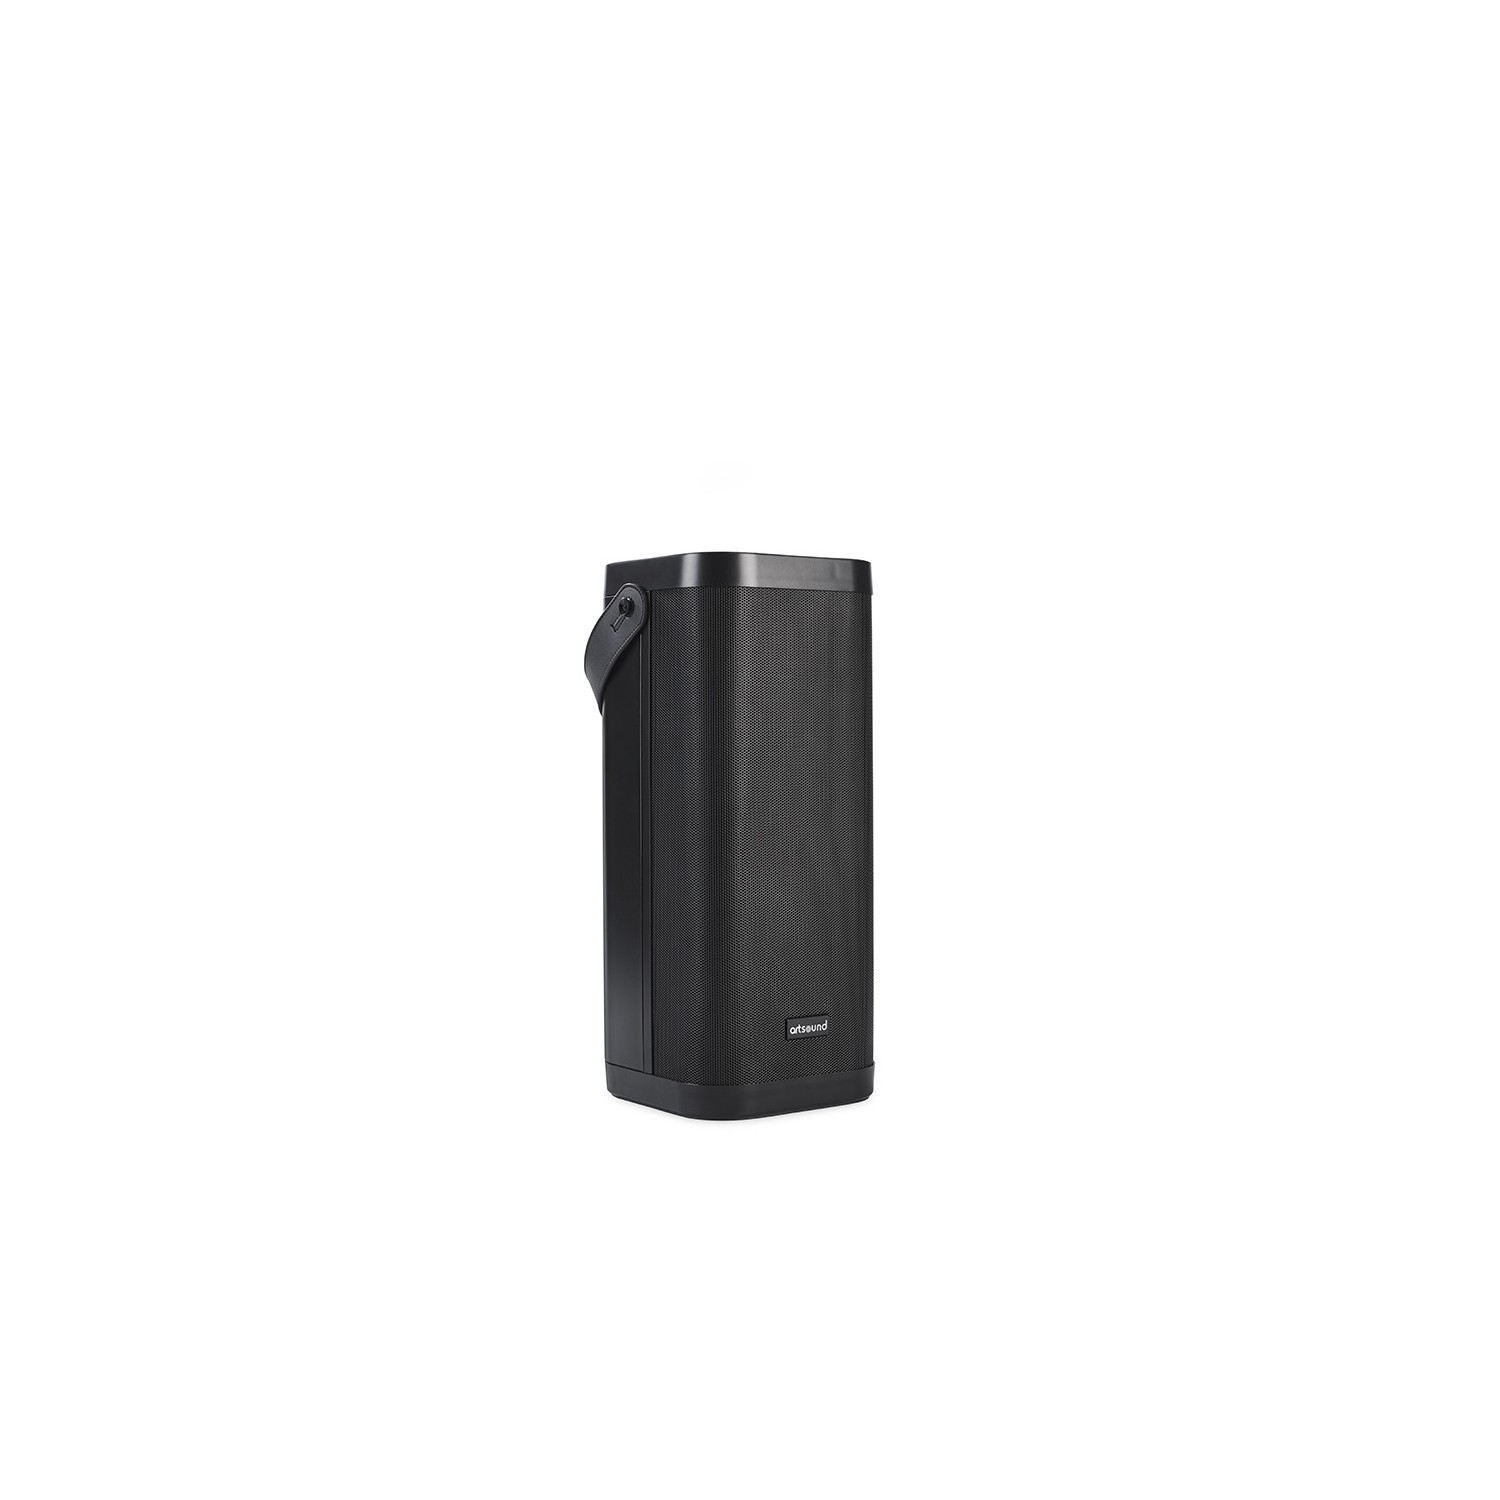 bubbel masker Gedateerd PWR05 3-Way portable bluetooth loudspeaker with active filter, 150W